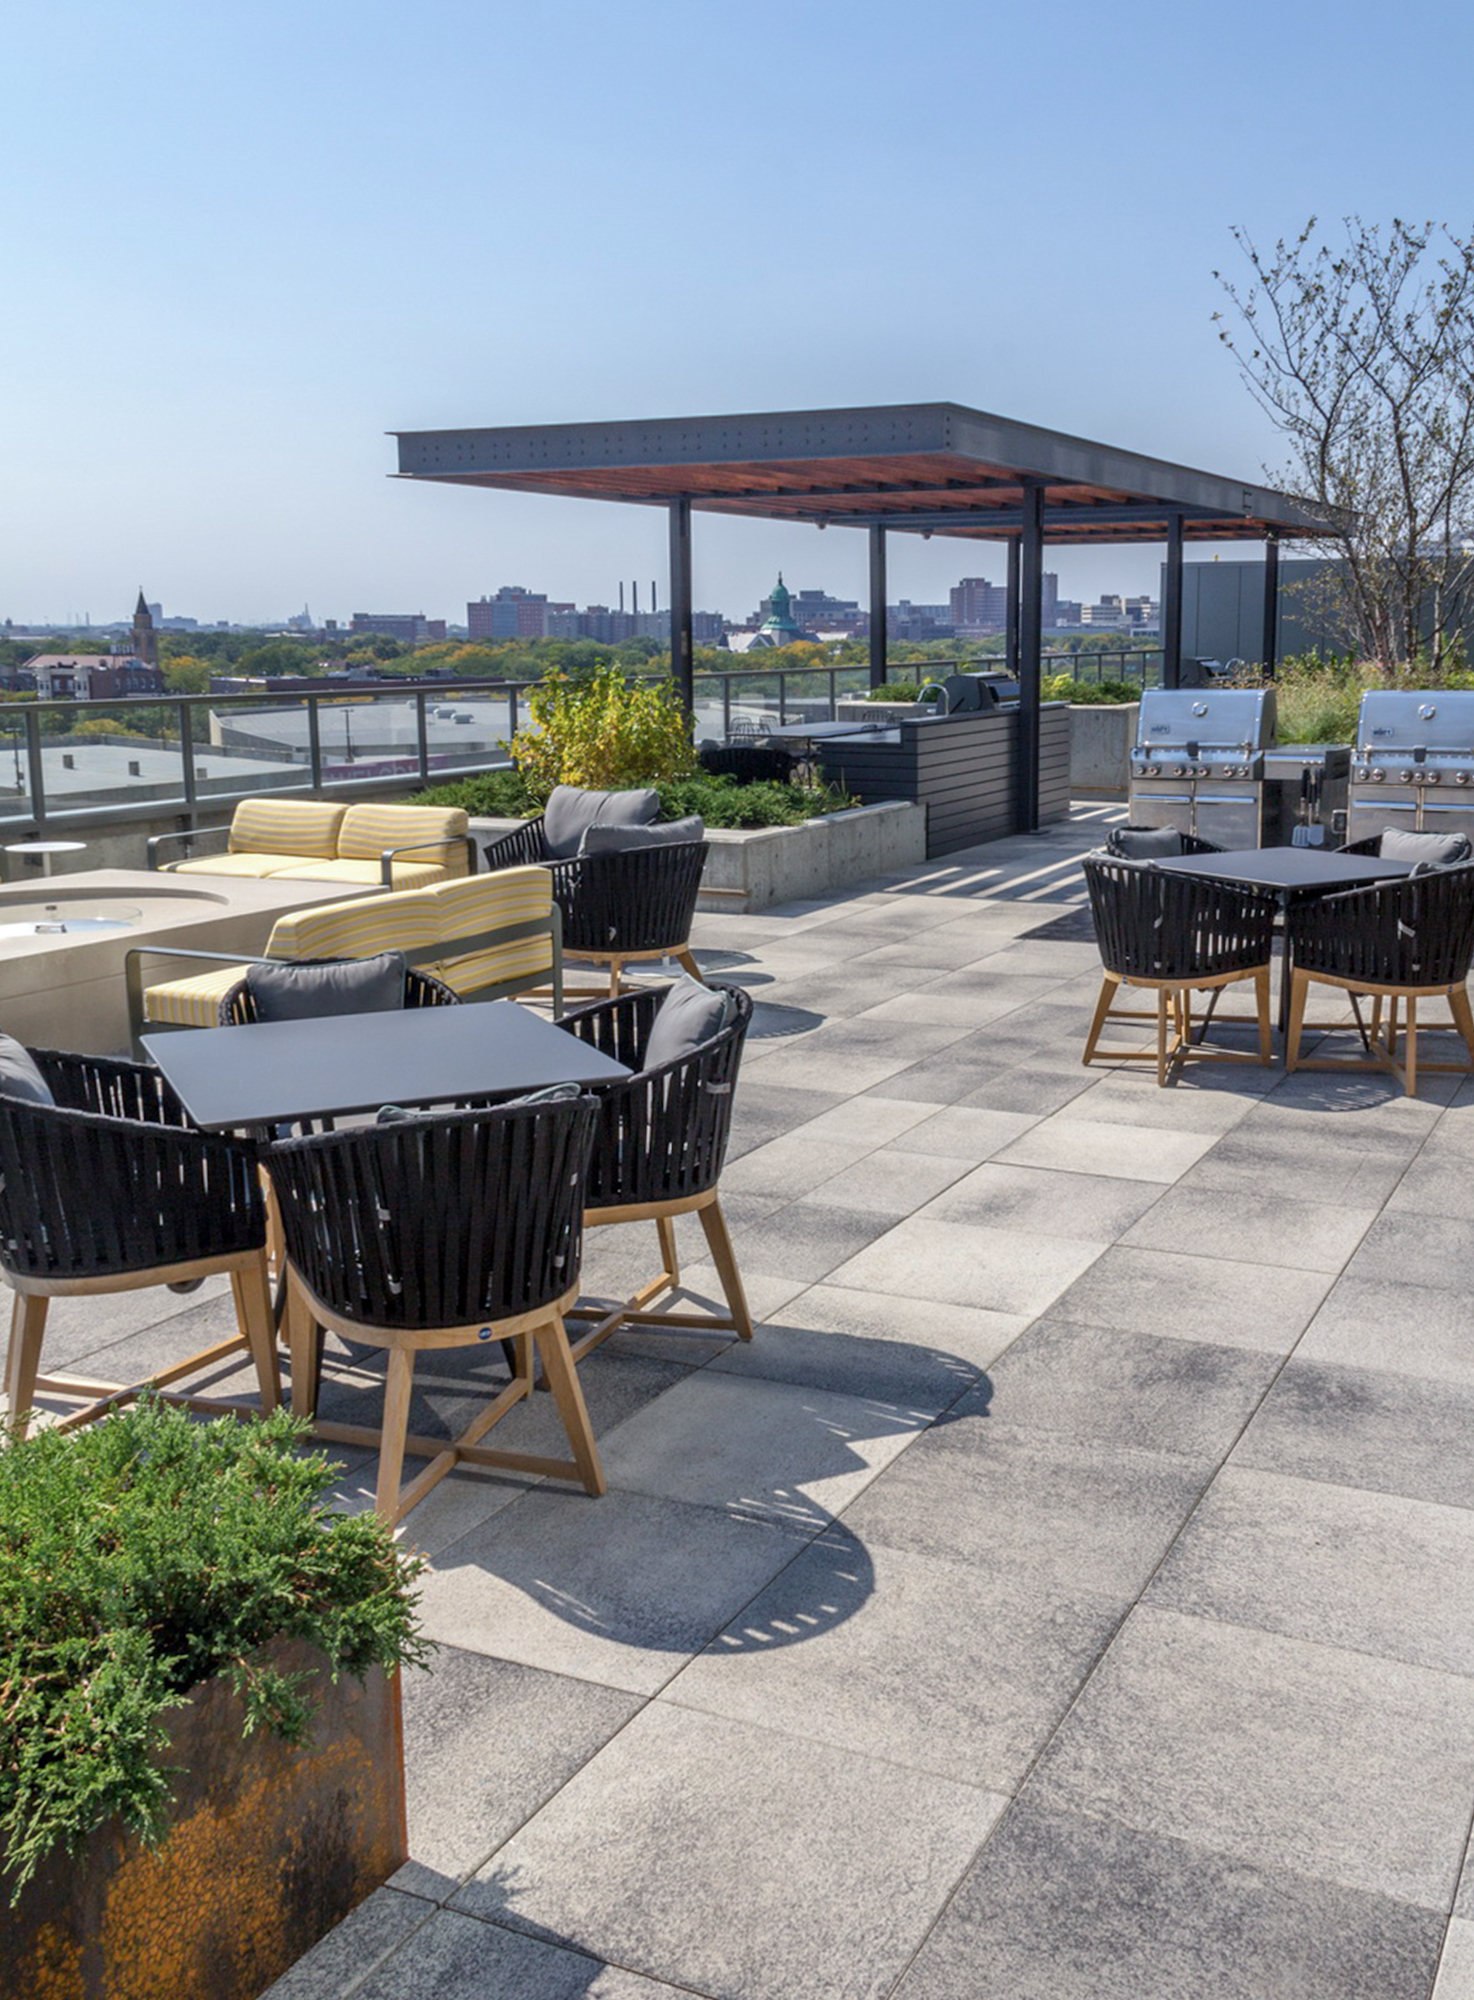 A roof deck overlooking the Chicago skyline features grey Umbriano slabs and outdoor amenities including an outdoor kitchen and BBQs.